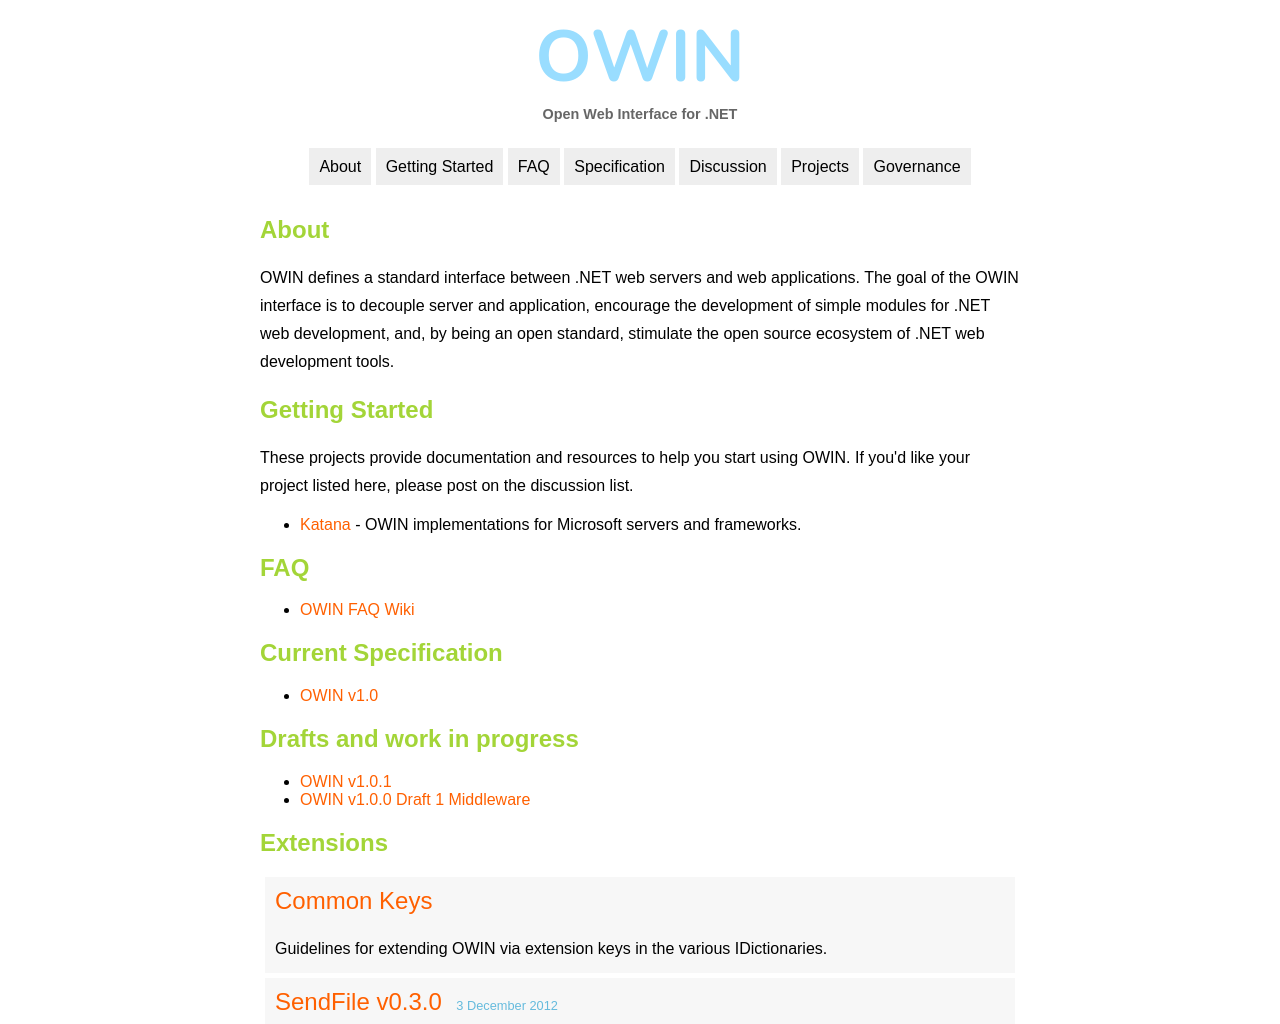 owin.org